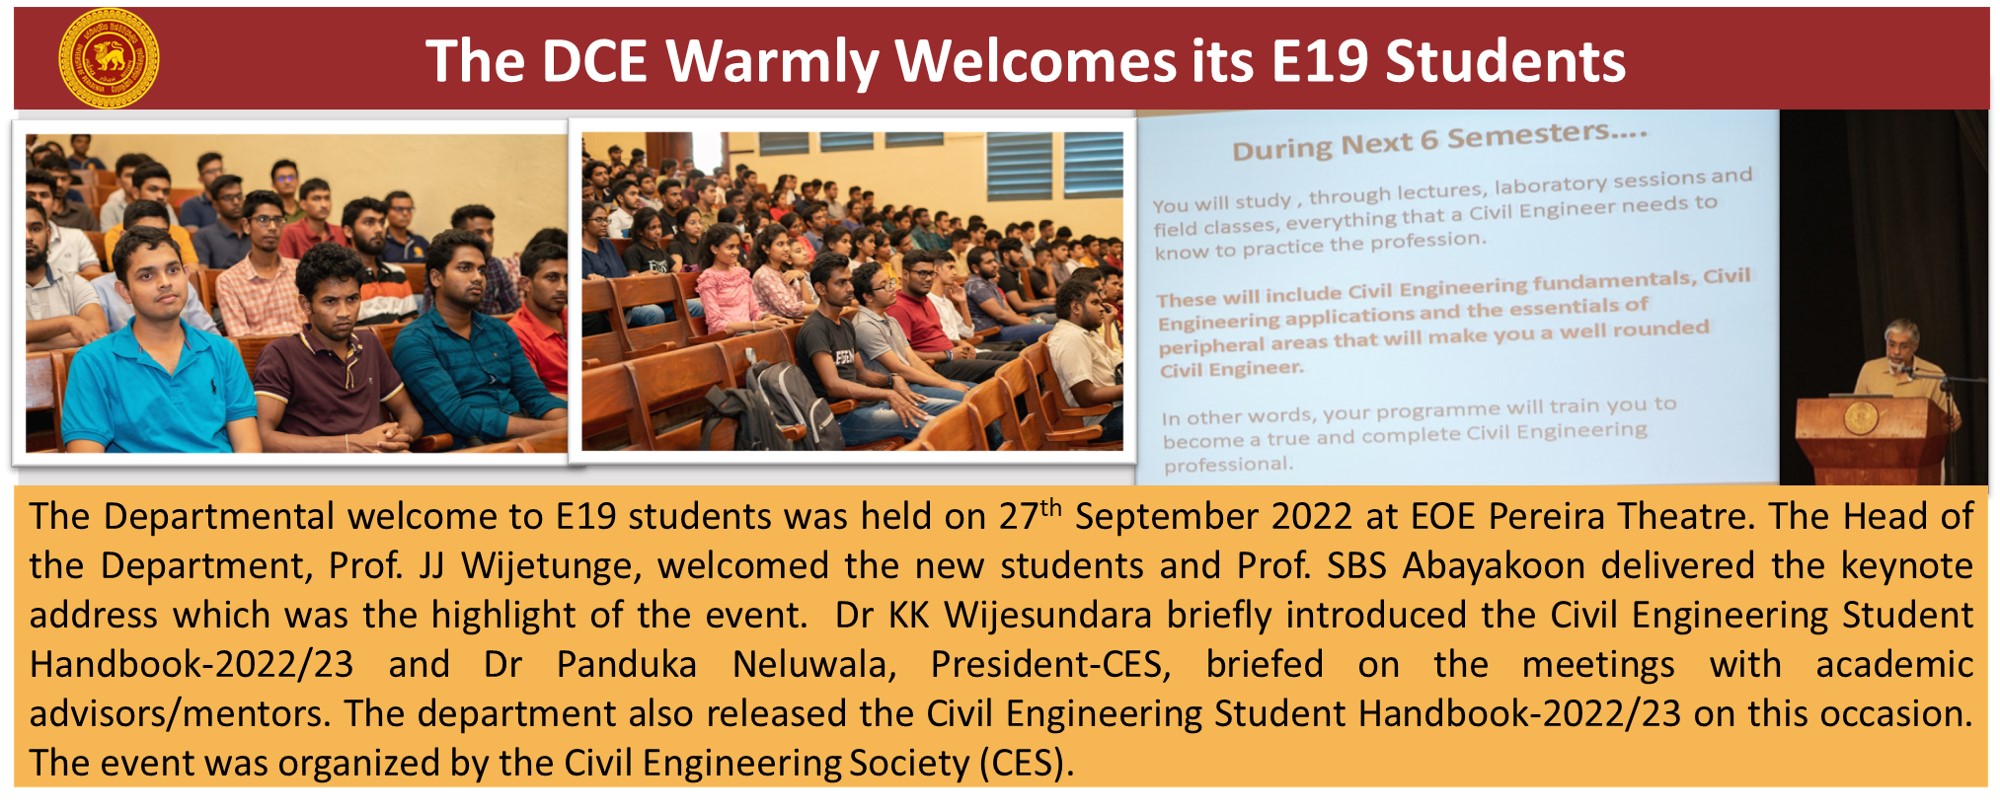 The DCE Warmly Welcomes its E19 Students